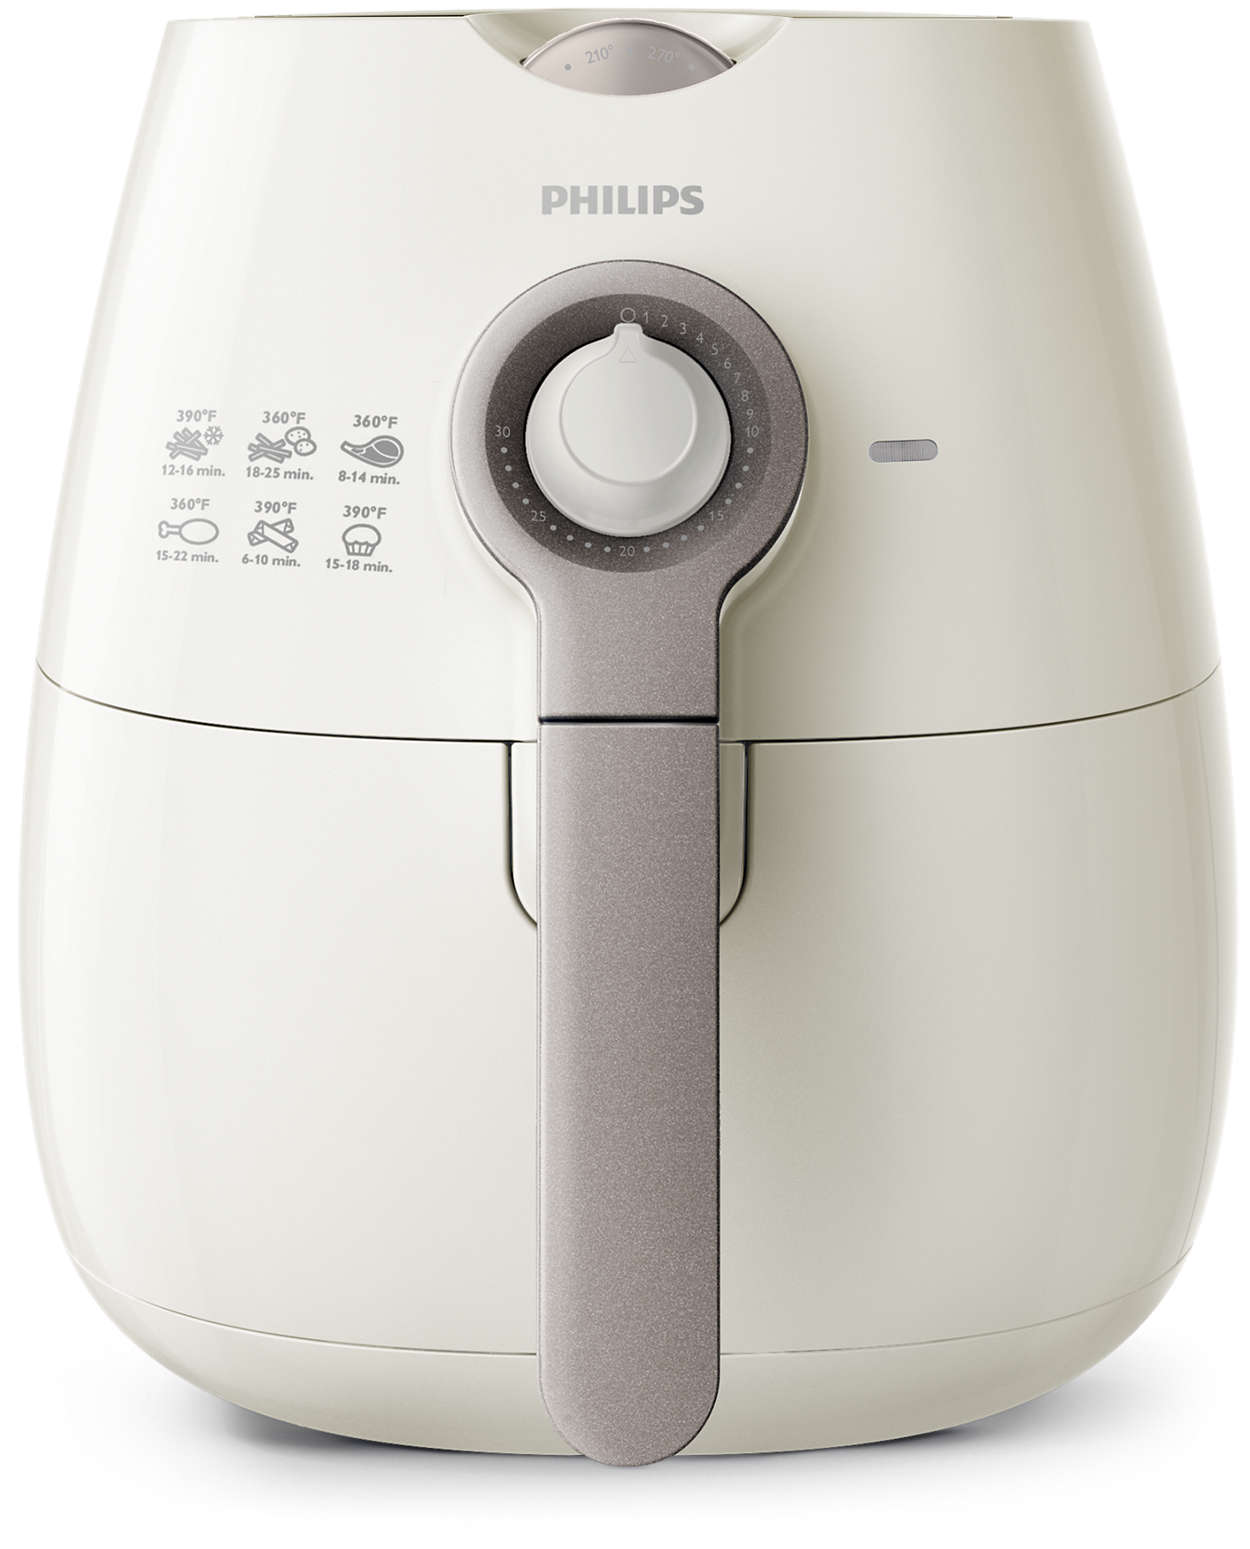 https://images.philips.com/is/image/philipsconsumer/9a828be896474590ba36ad28015a1eb4?$jpglarge$&wid=1250